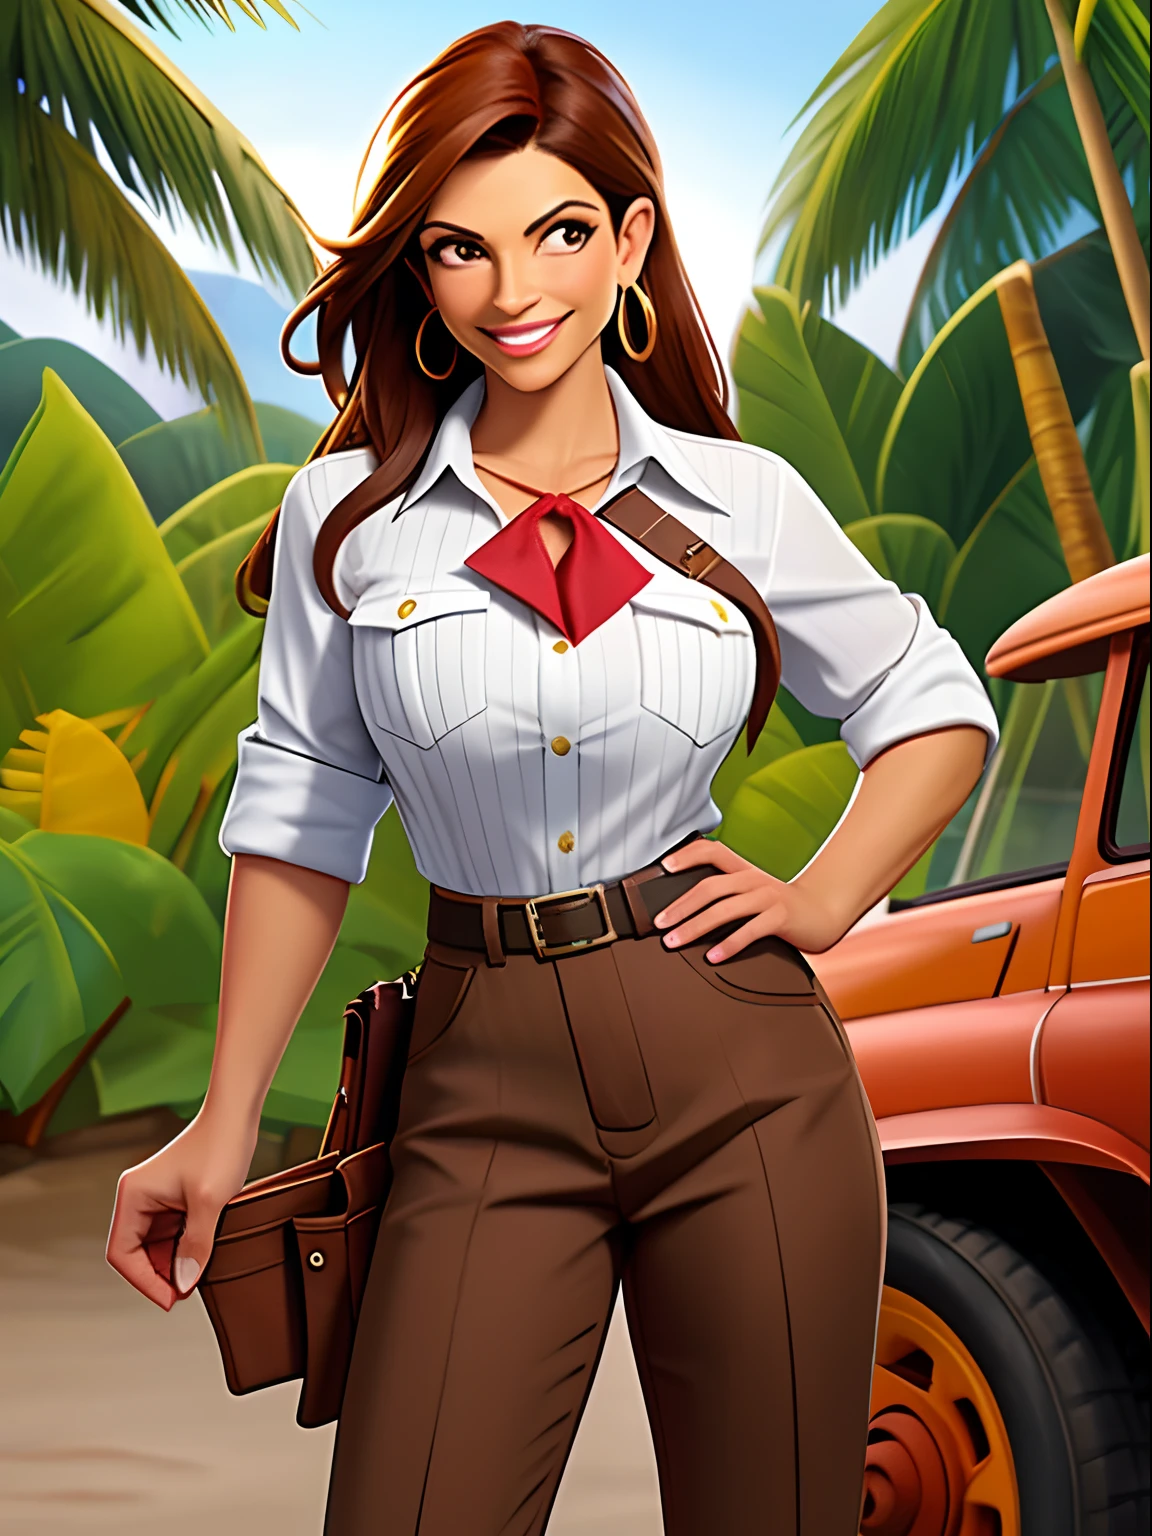 Denise Milani, latina, bronze skin, Hispanic, dark skin, solo, 1girl, brown hair, long hair, red neckerchief, Denise Milani body type, beautiful, smile, Amazon River explorer from the 1920s, gun holster on hip, gun in holster, white pinstripe button up shirt, shirt unbuttoned, shirt tucked into brown pants, Brazilian market, shops, vendors, outside, chatting with viewer, holding ore